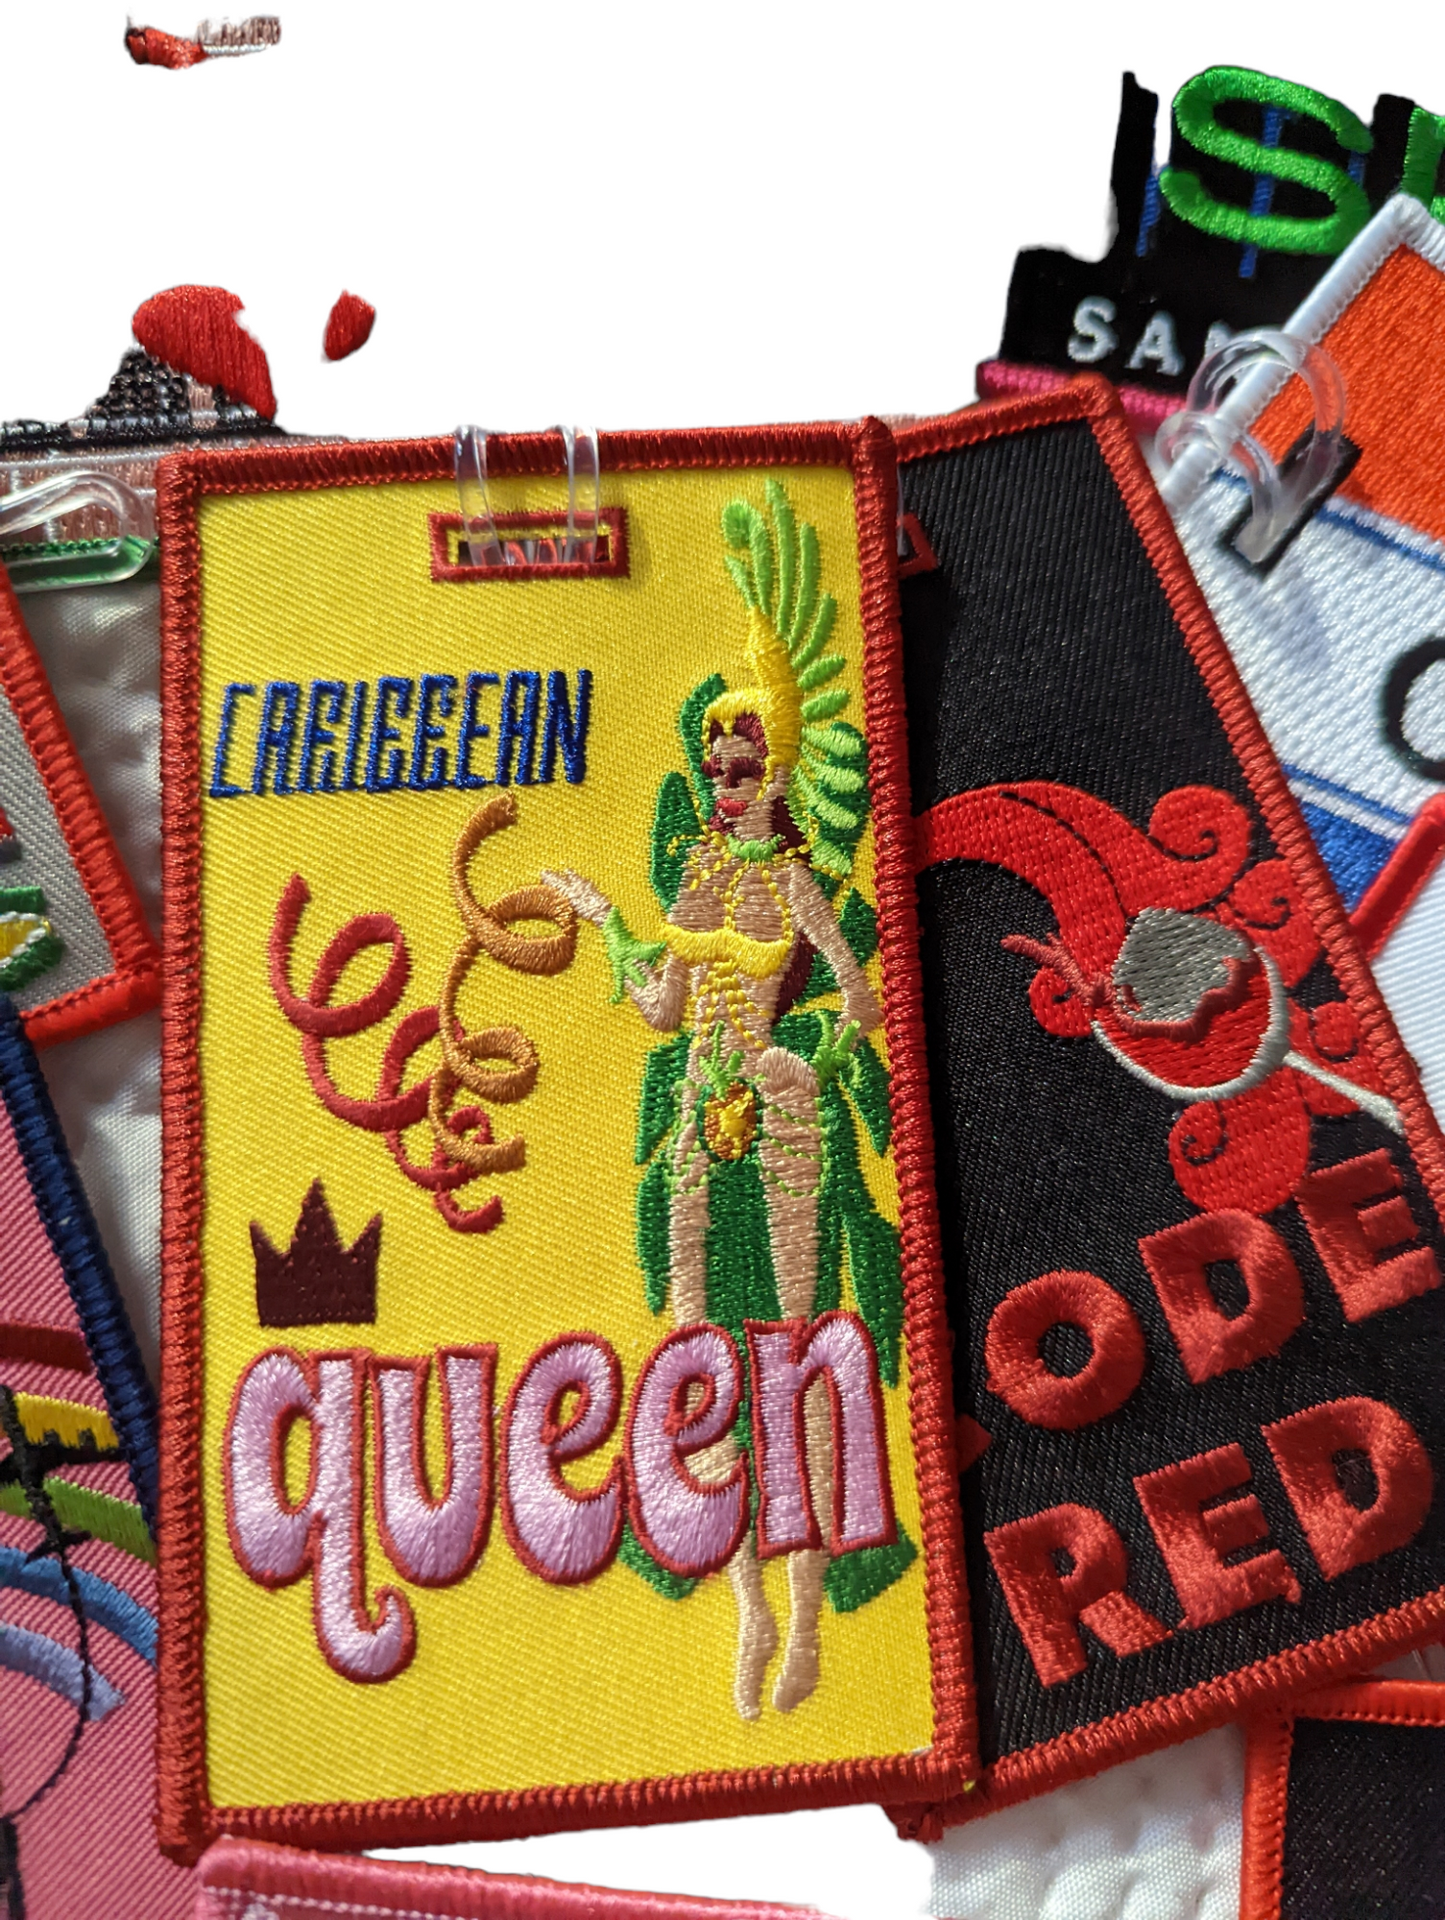 Caribbean Queen 👑 Luggage Tags